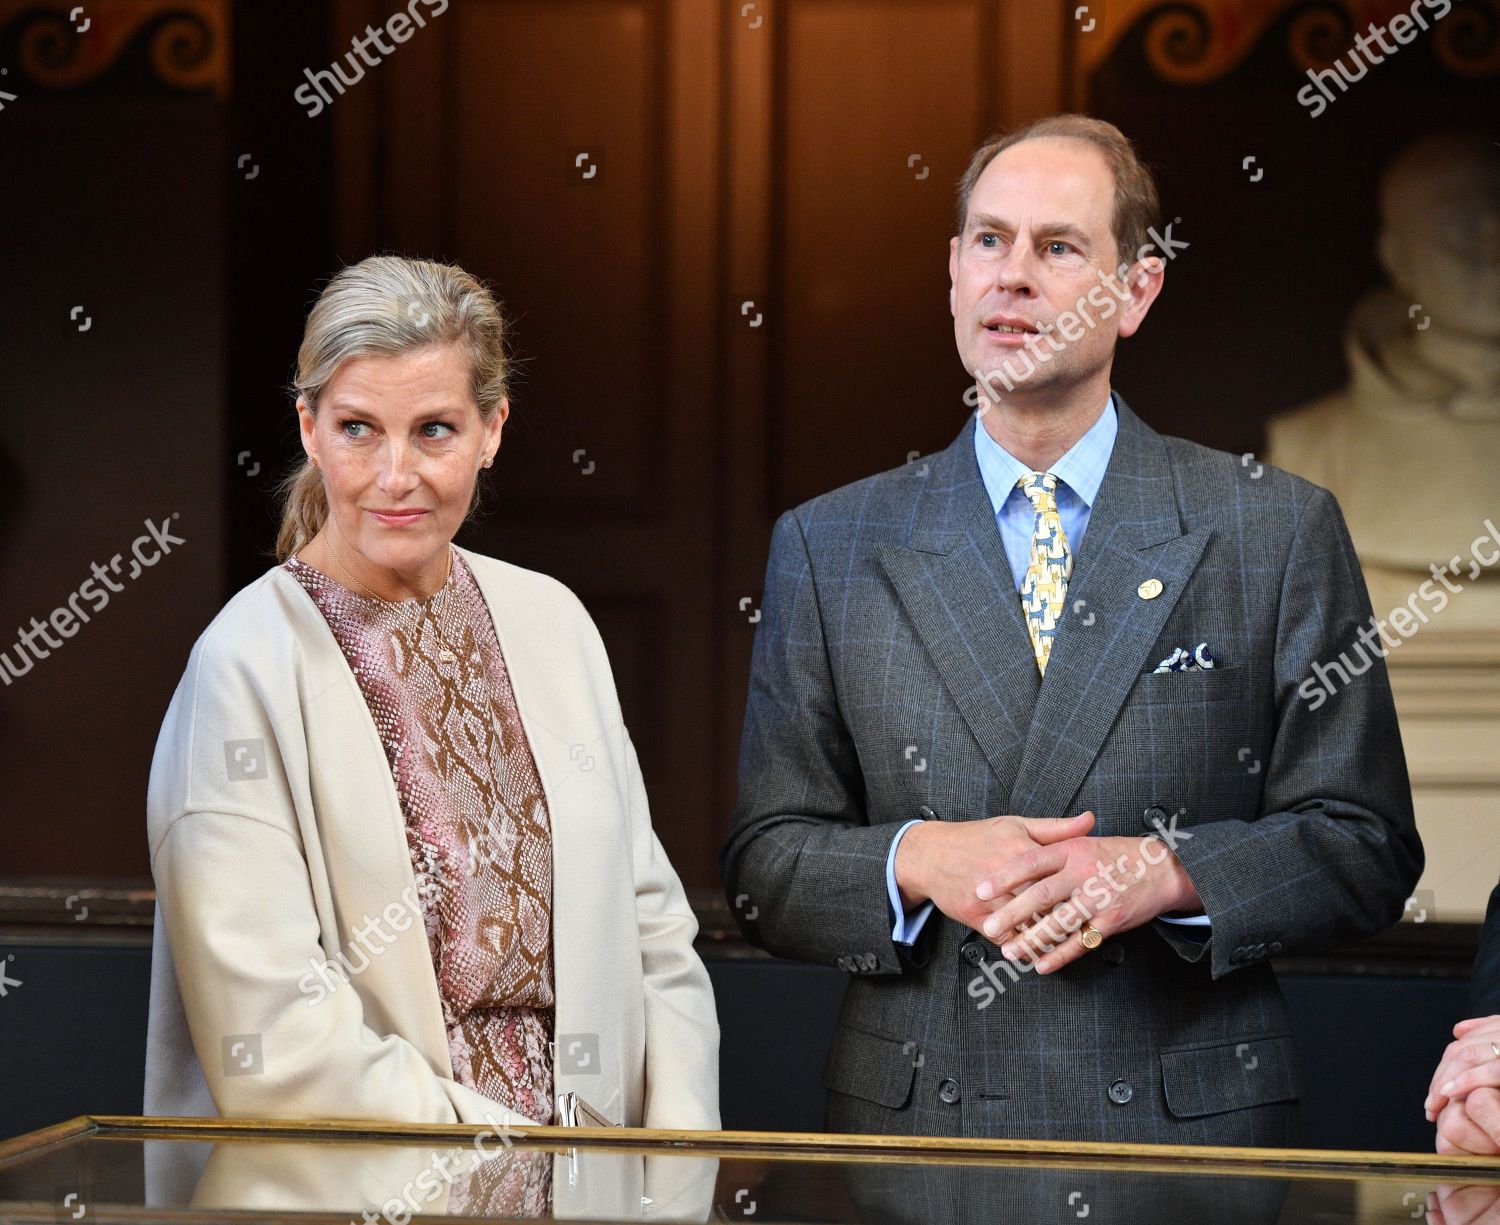 prince-edward-and-sophie-countess-of-wessex-visit-to-paris-france-shutterstock-editorial-9907868g.jpg